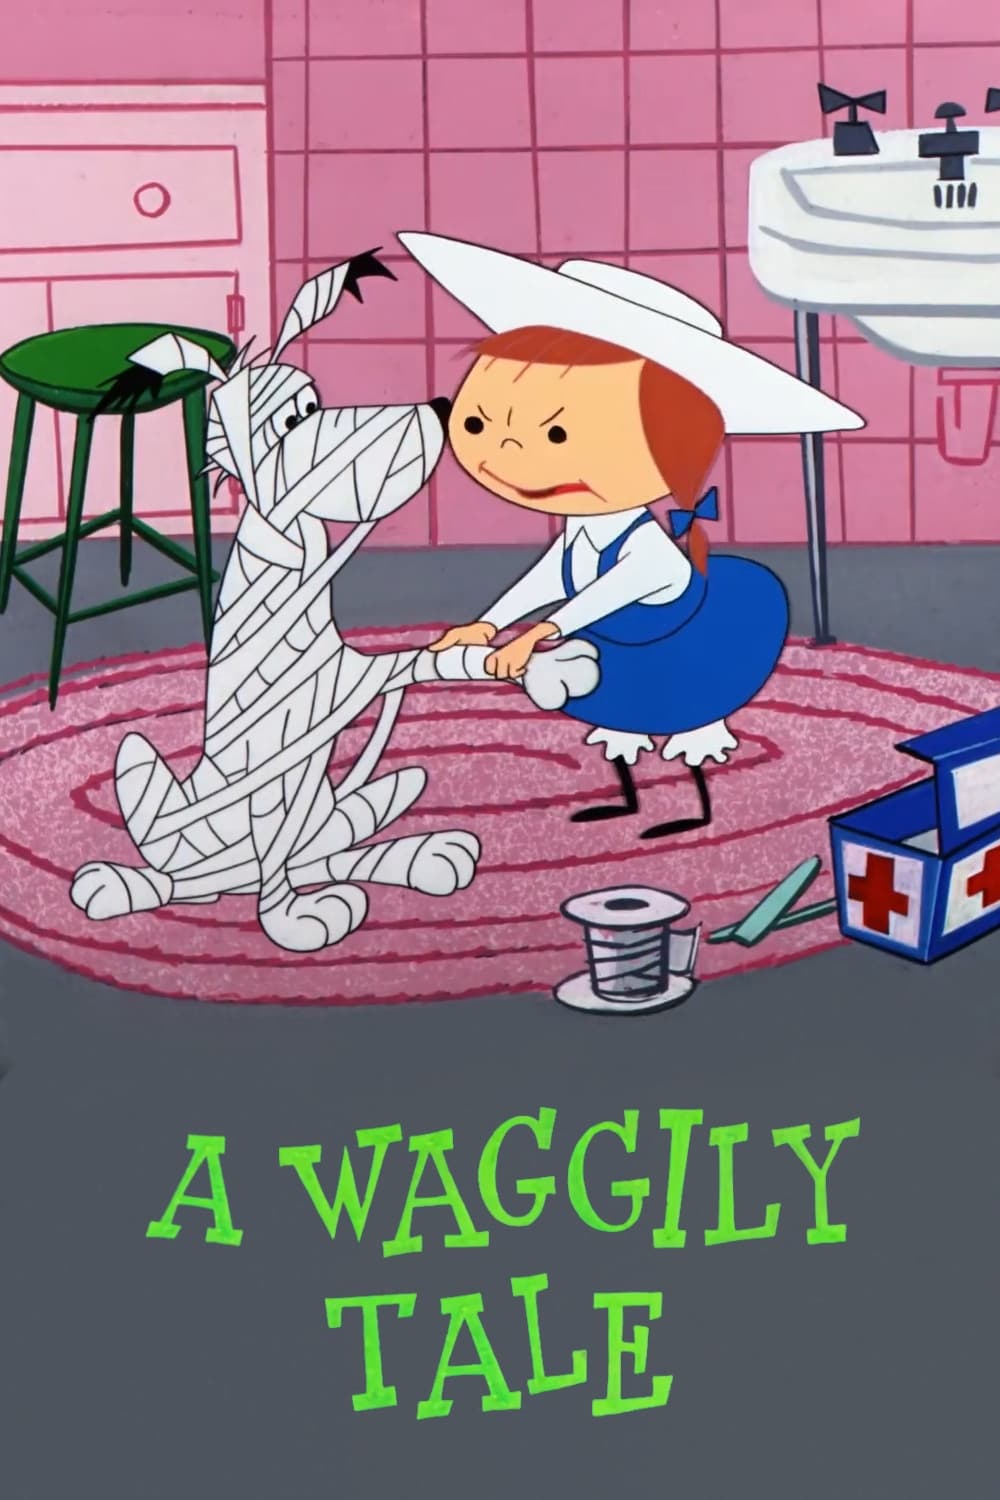 A Waggily Tale (1958)